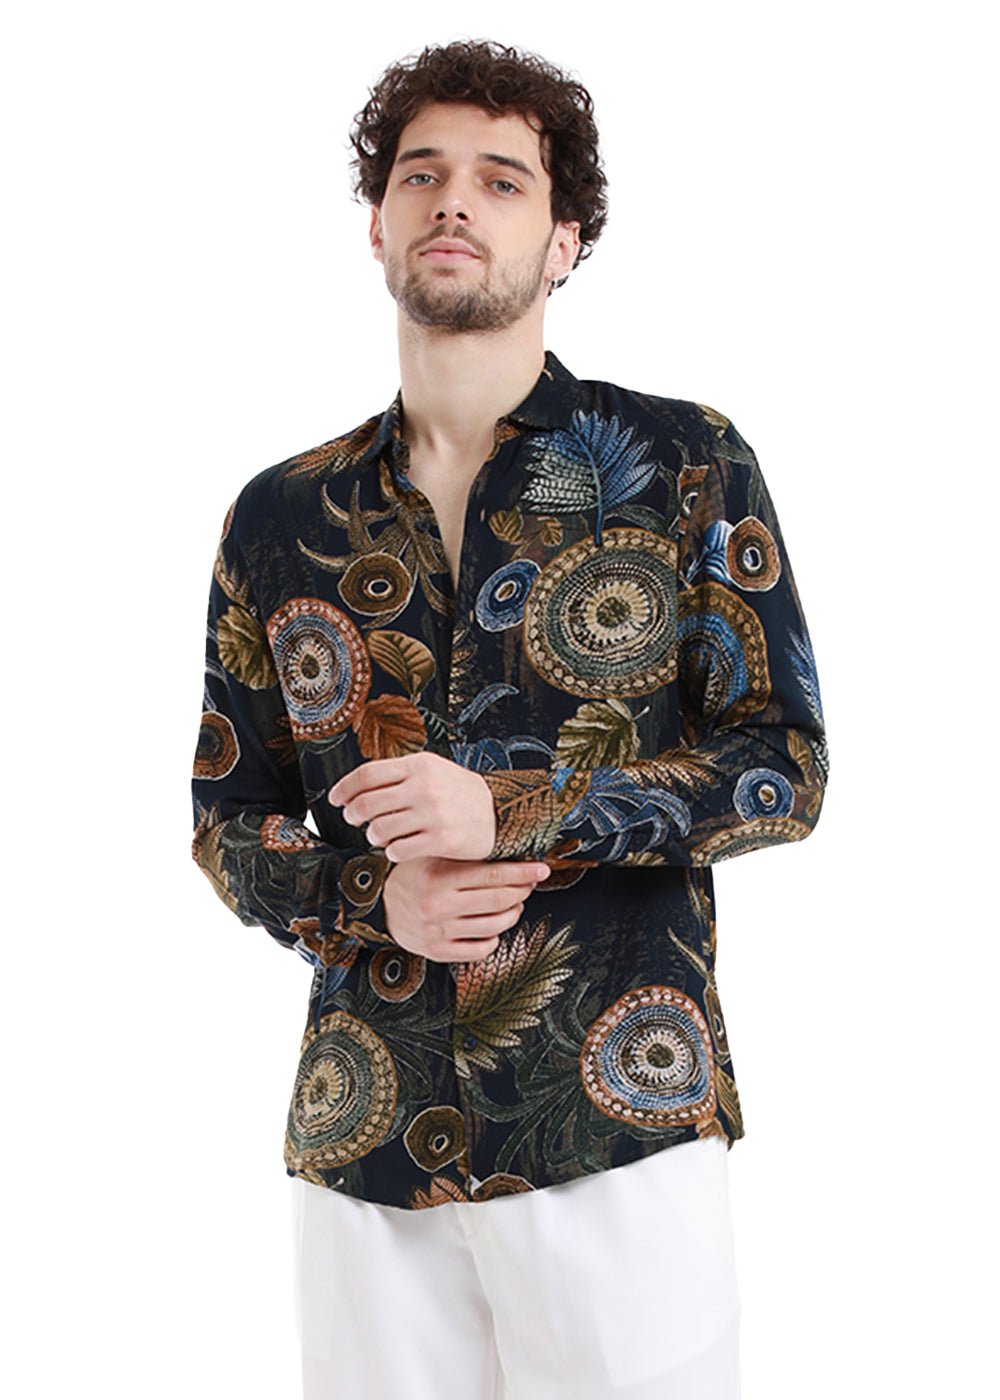 Areca Rustic Brown Feather Shirt